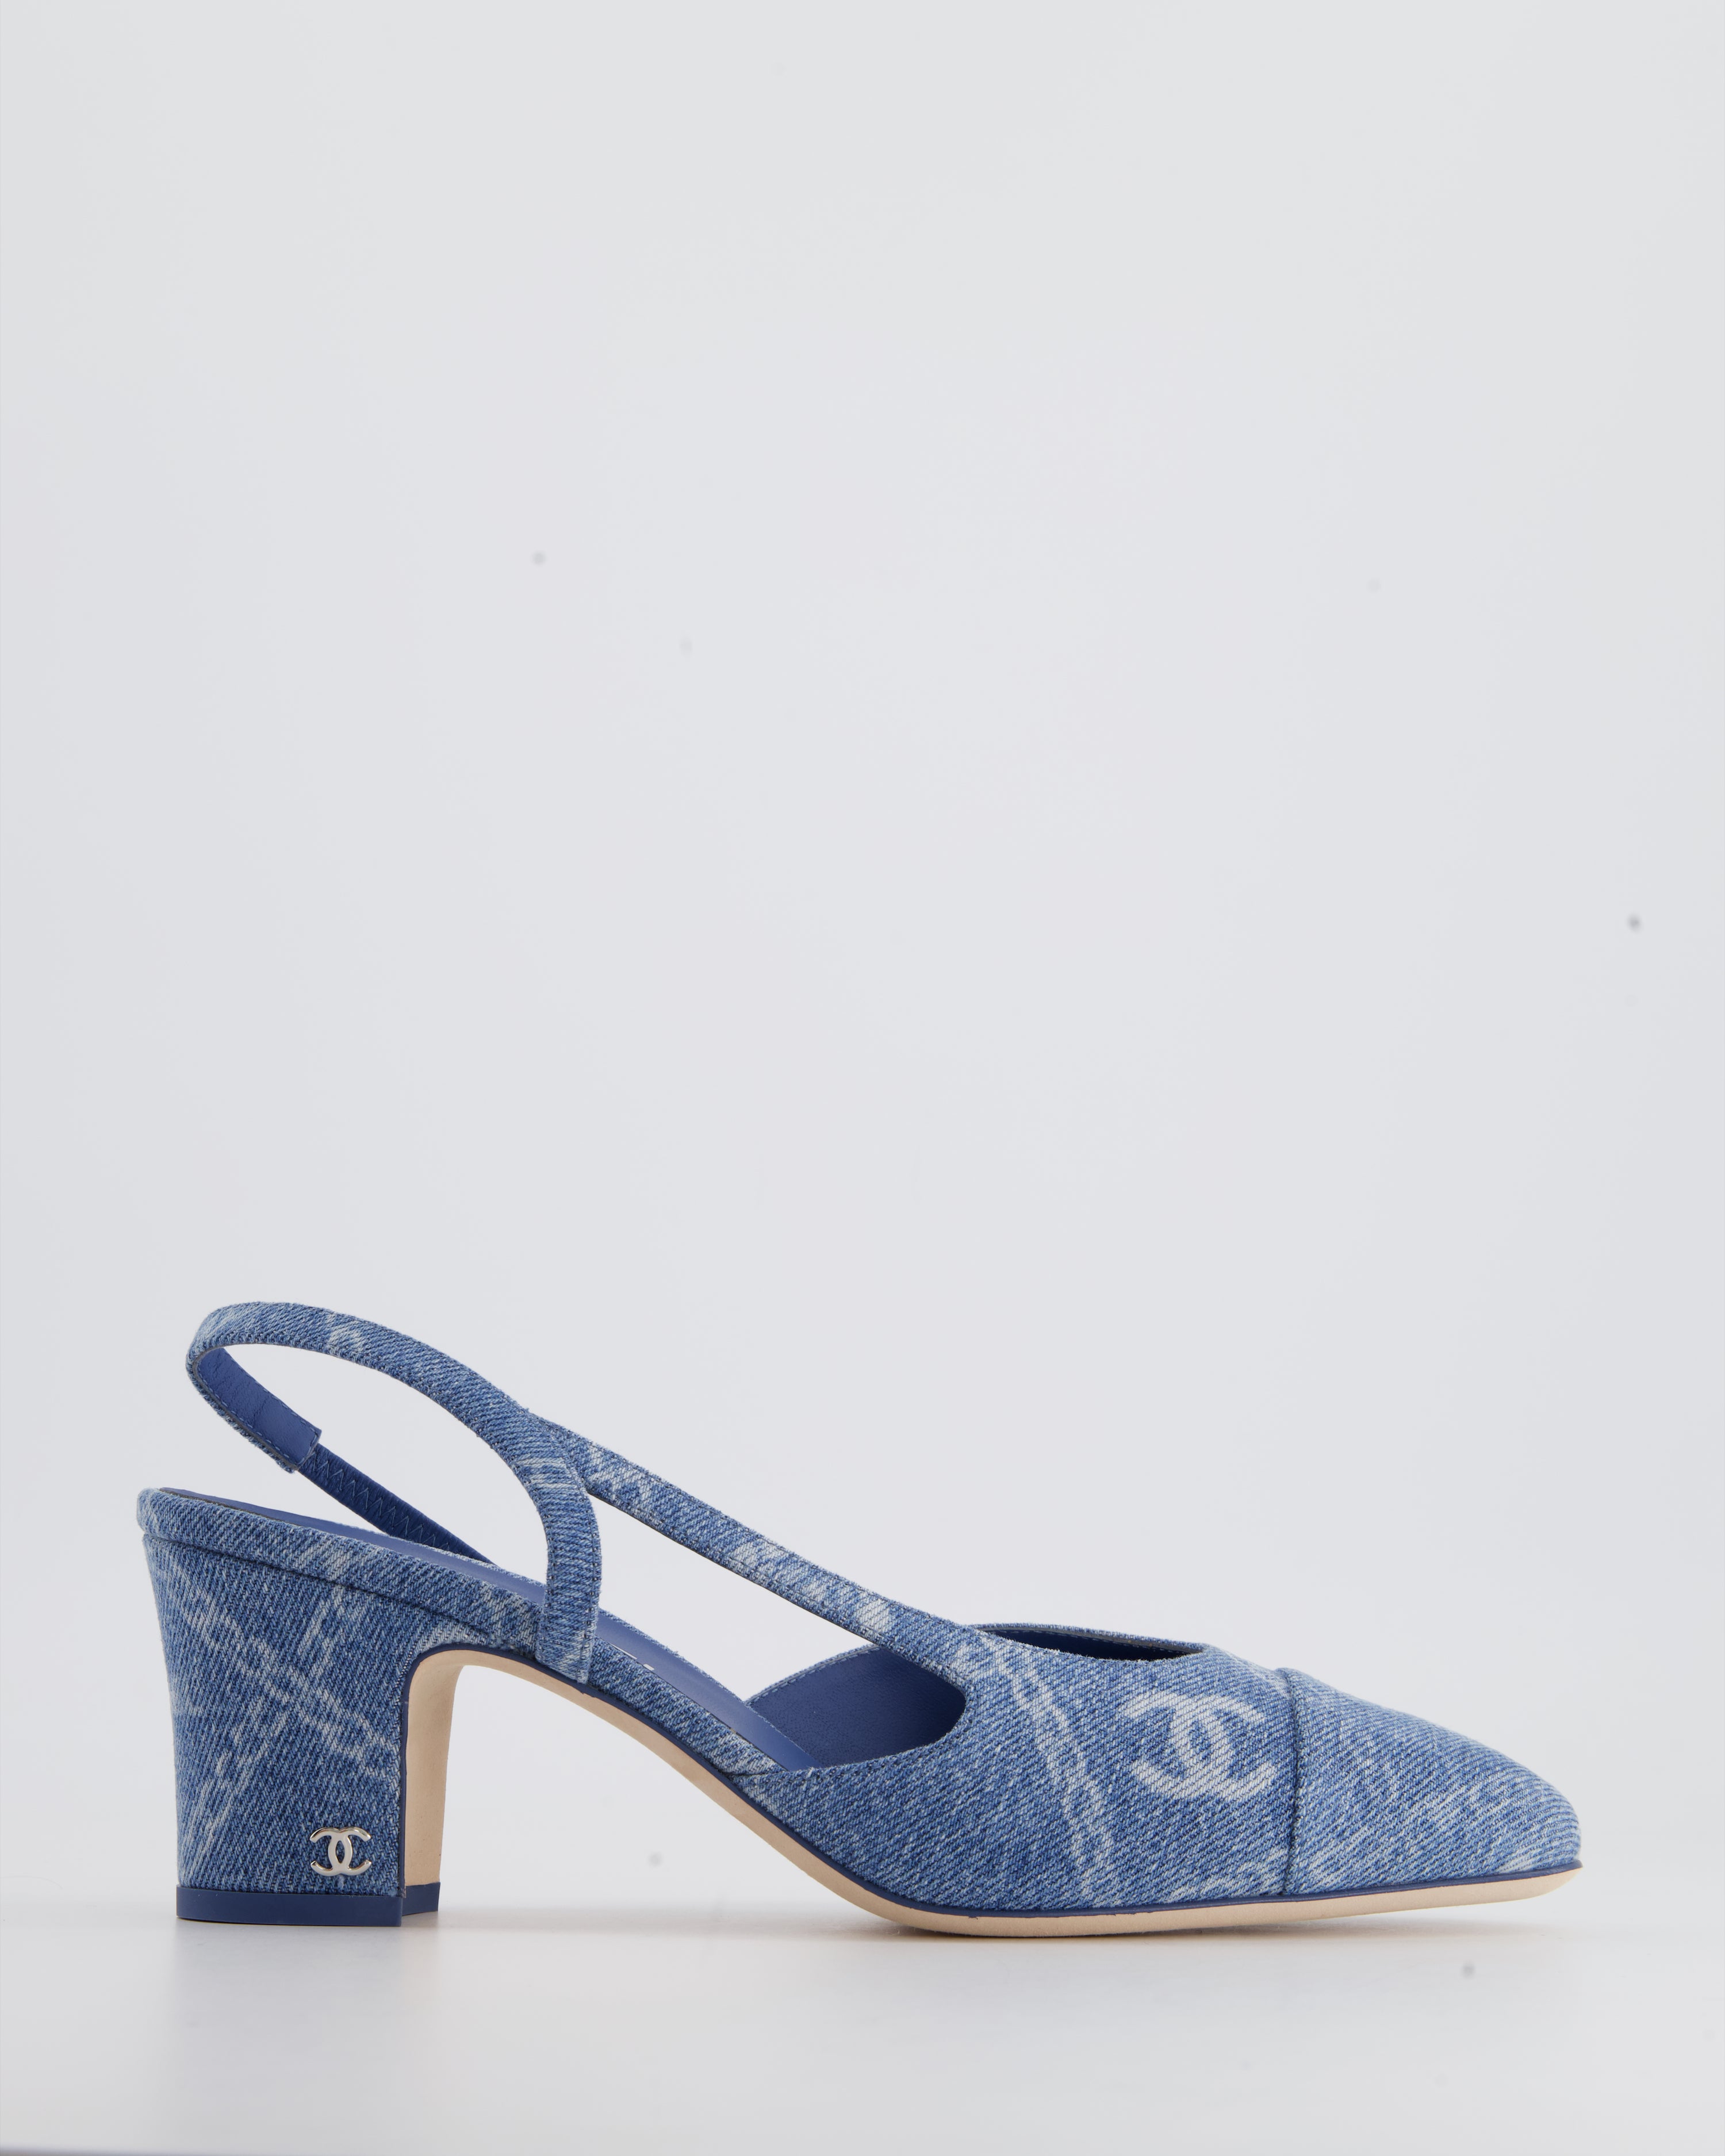 *SUPER Hot* Chanel Denim Classic Slingback With Logo And Chain Details Size EU 38.5